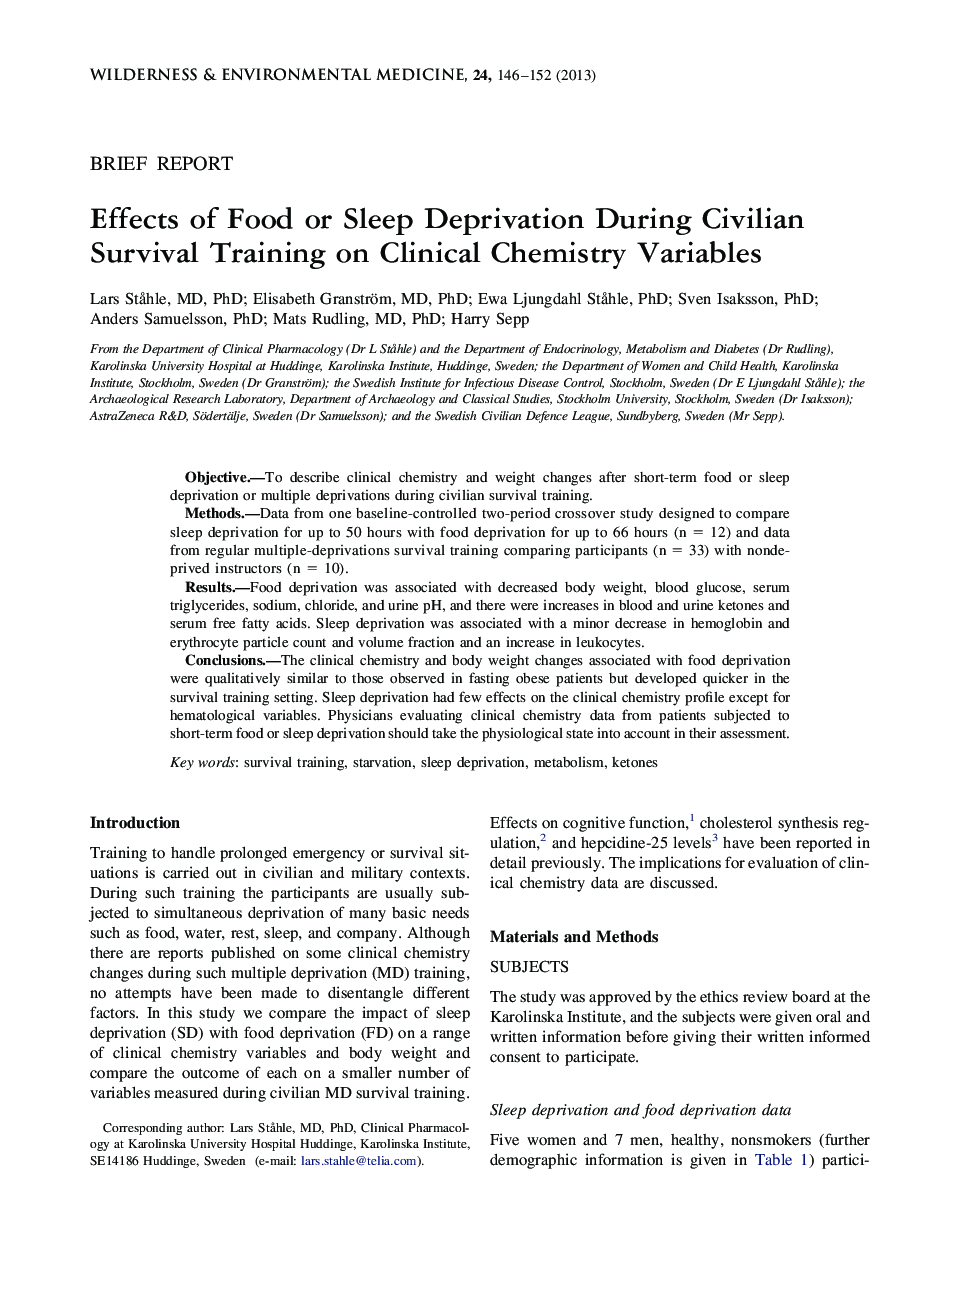 Effects of Food or Sleep Deprivation During Civilian Survival Training on Clinical Chemistry Variables